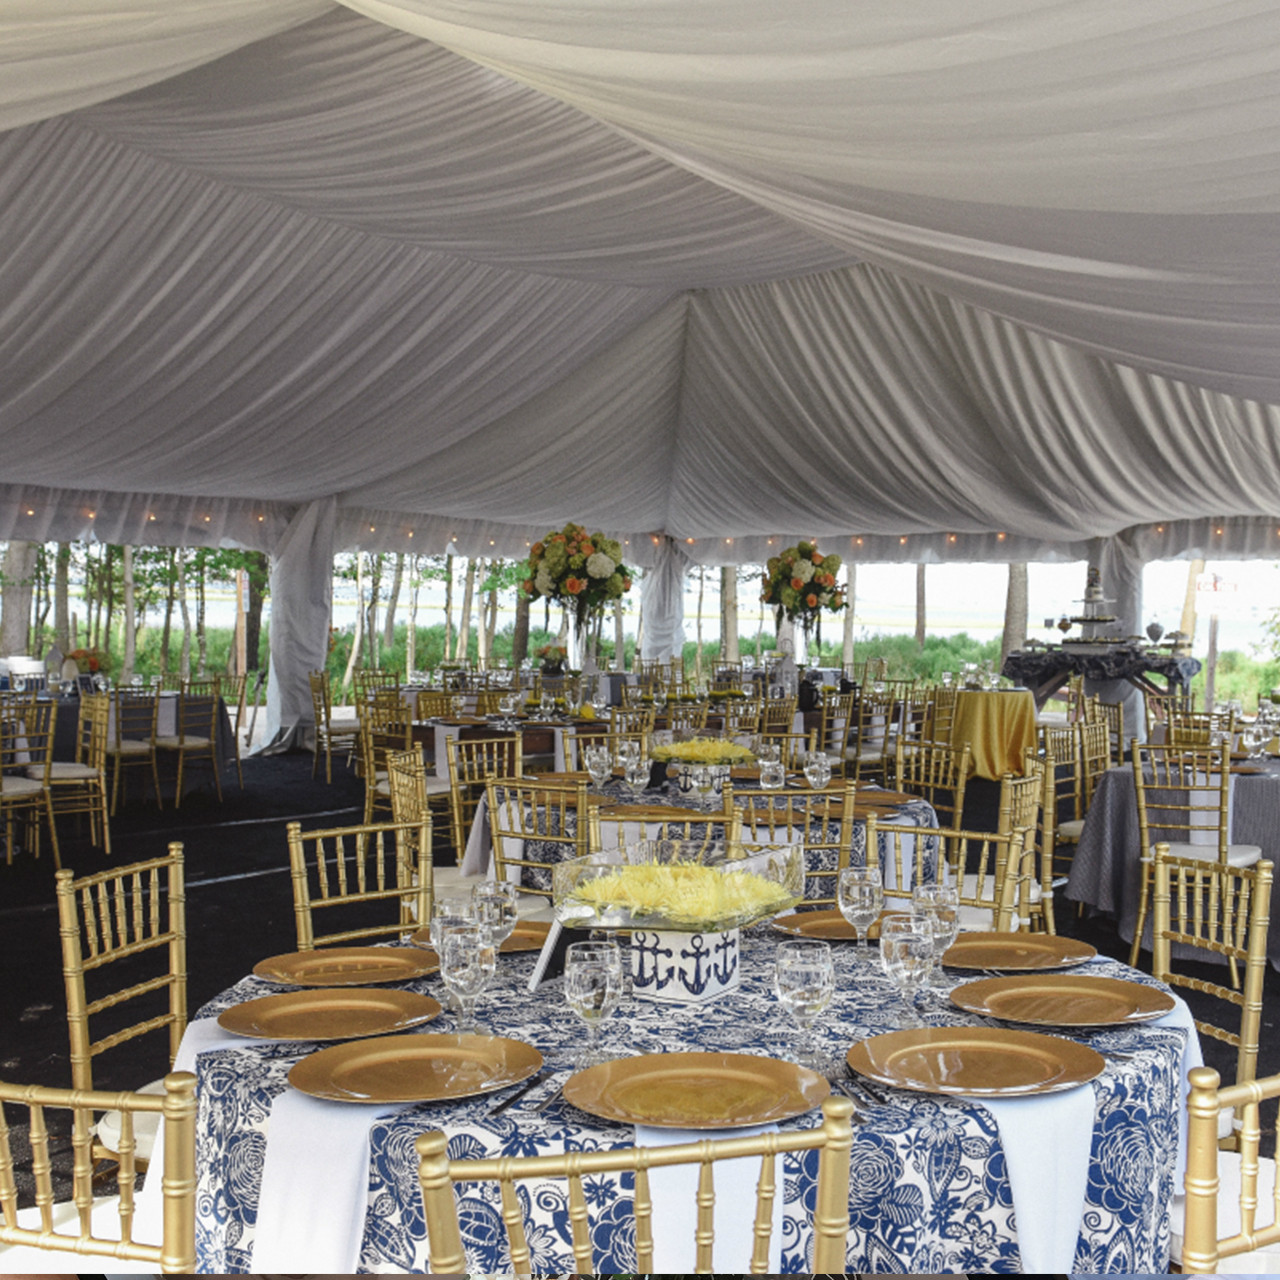 Frame style tent liner to add a pleasing look to the inside top.